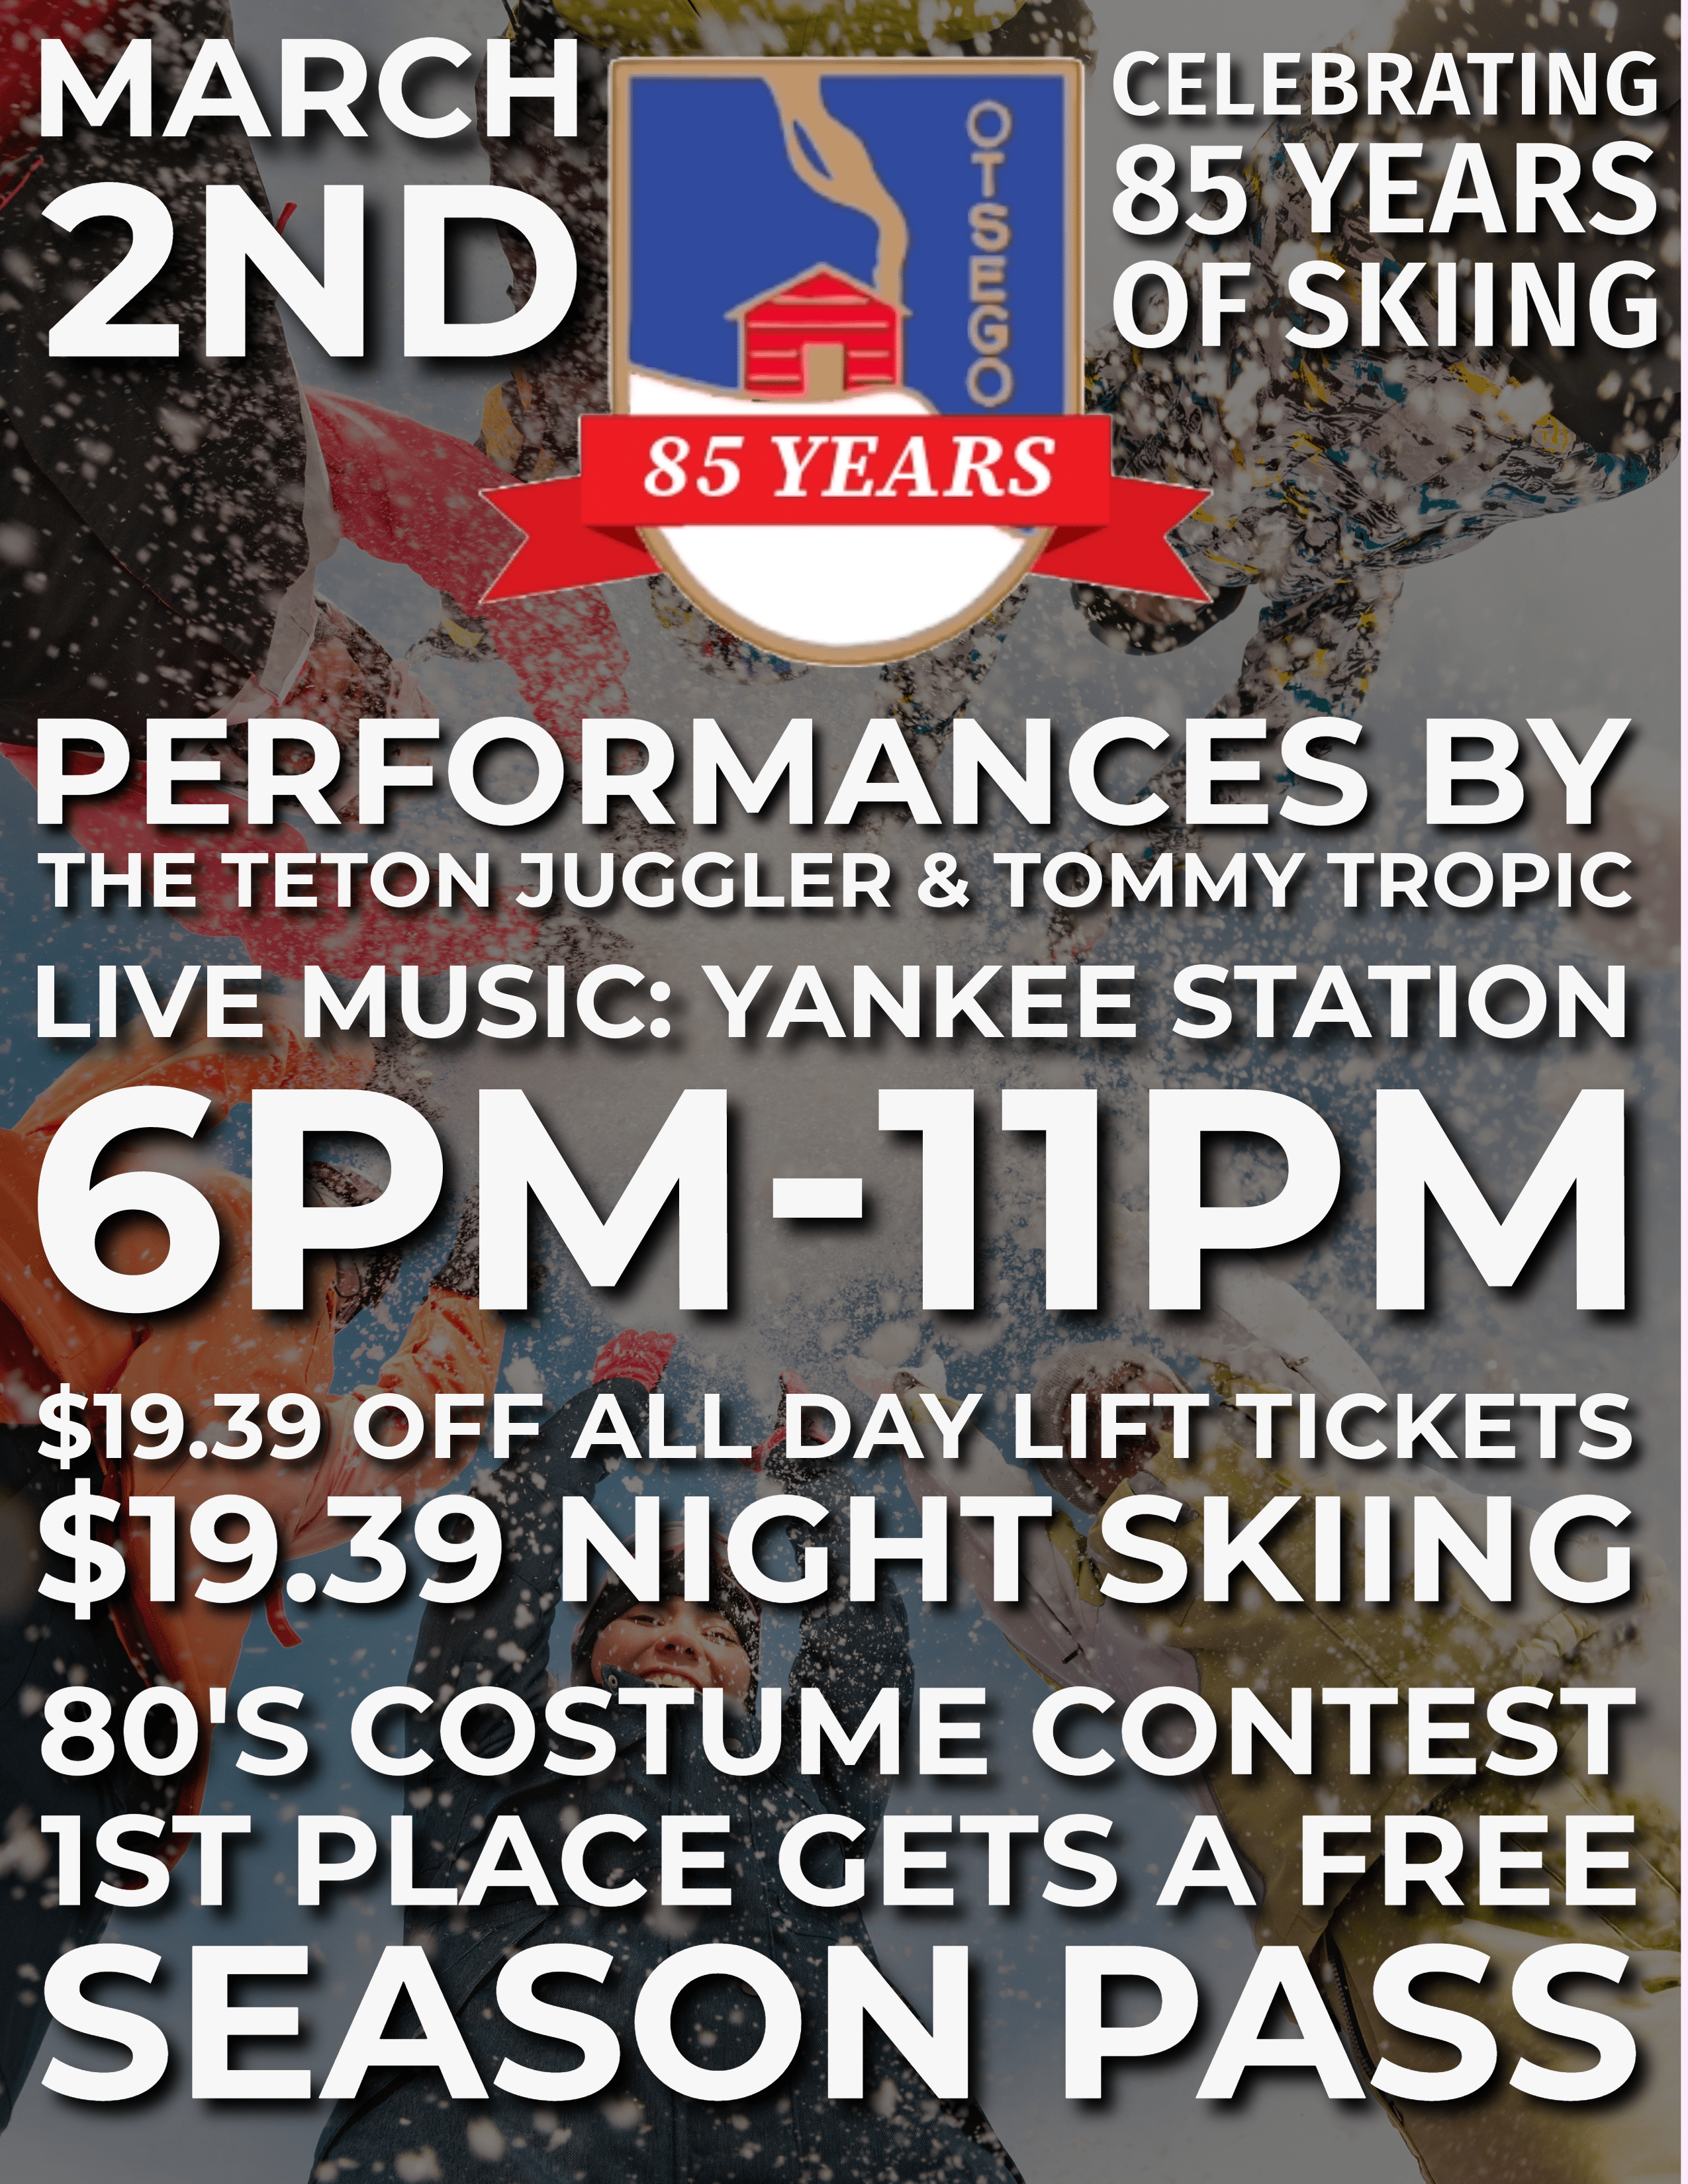 Festive flyer for Otsego Resort's 85th Skiing Anniversary on March 2nd, featuring live music, ski juggling shows, and special offers